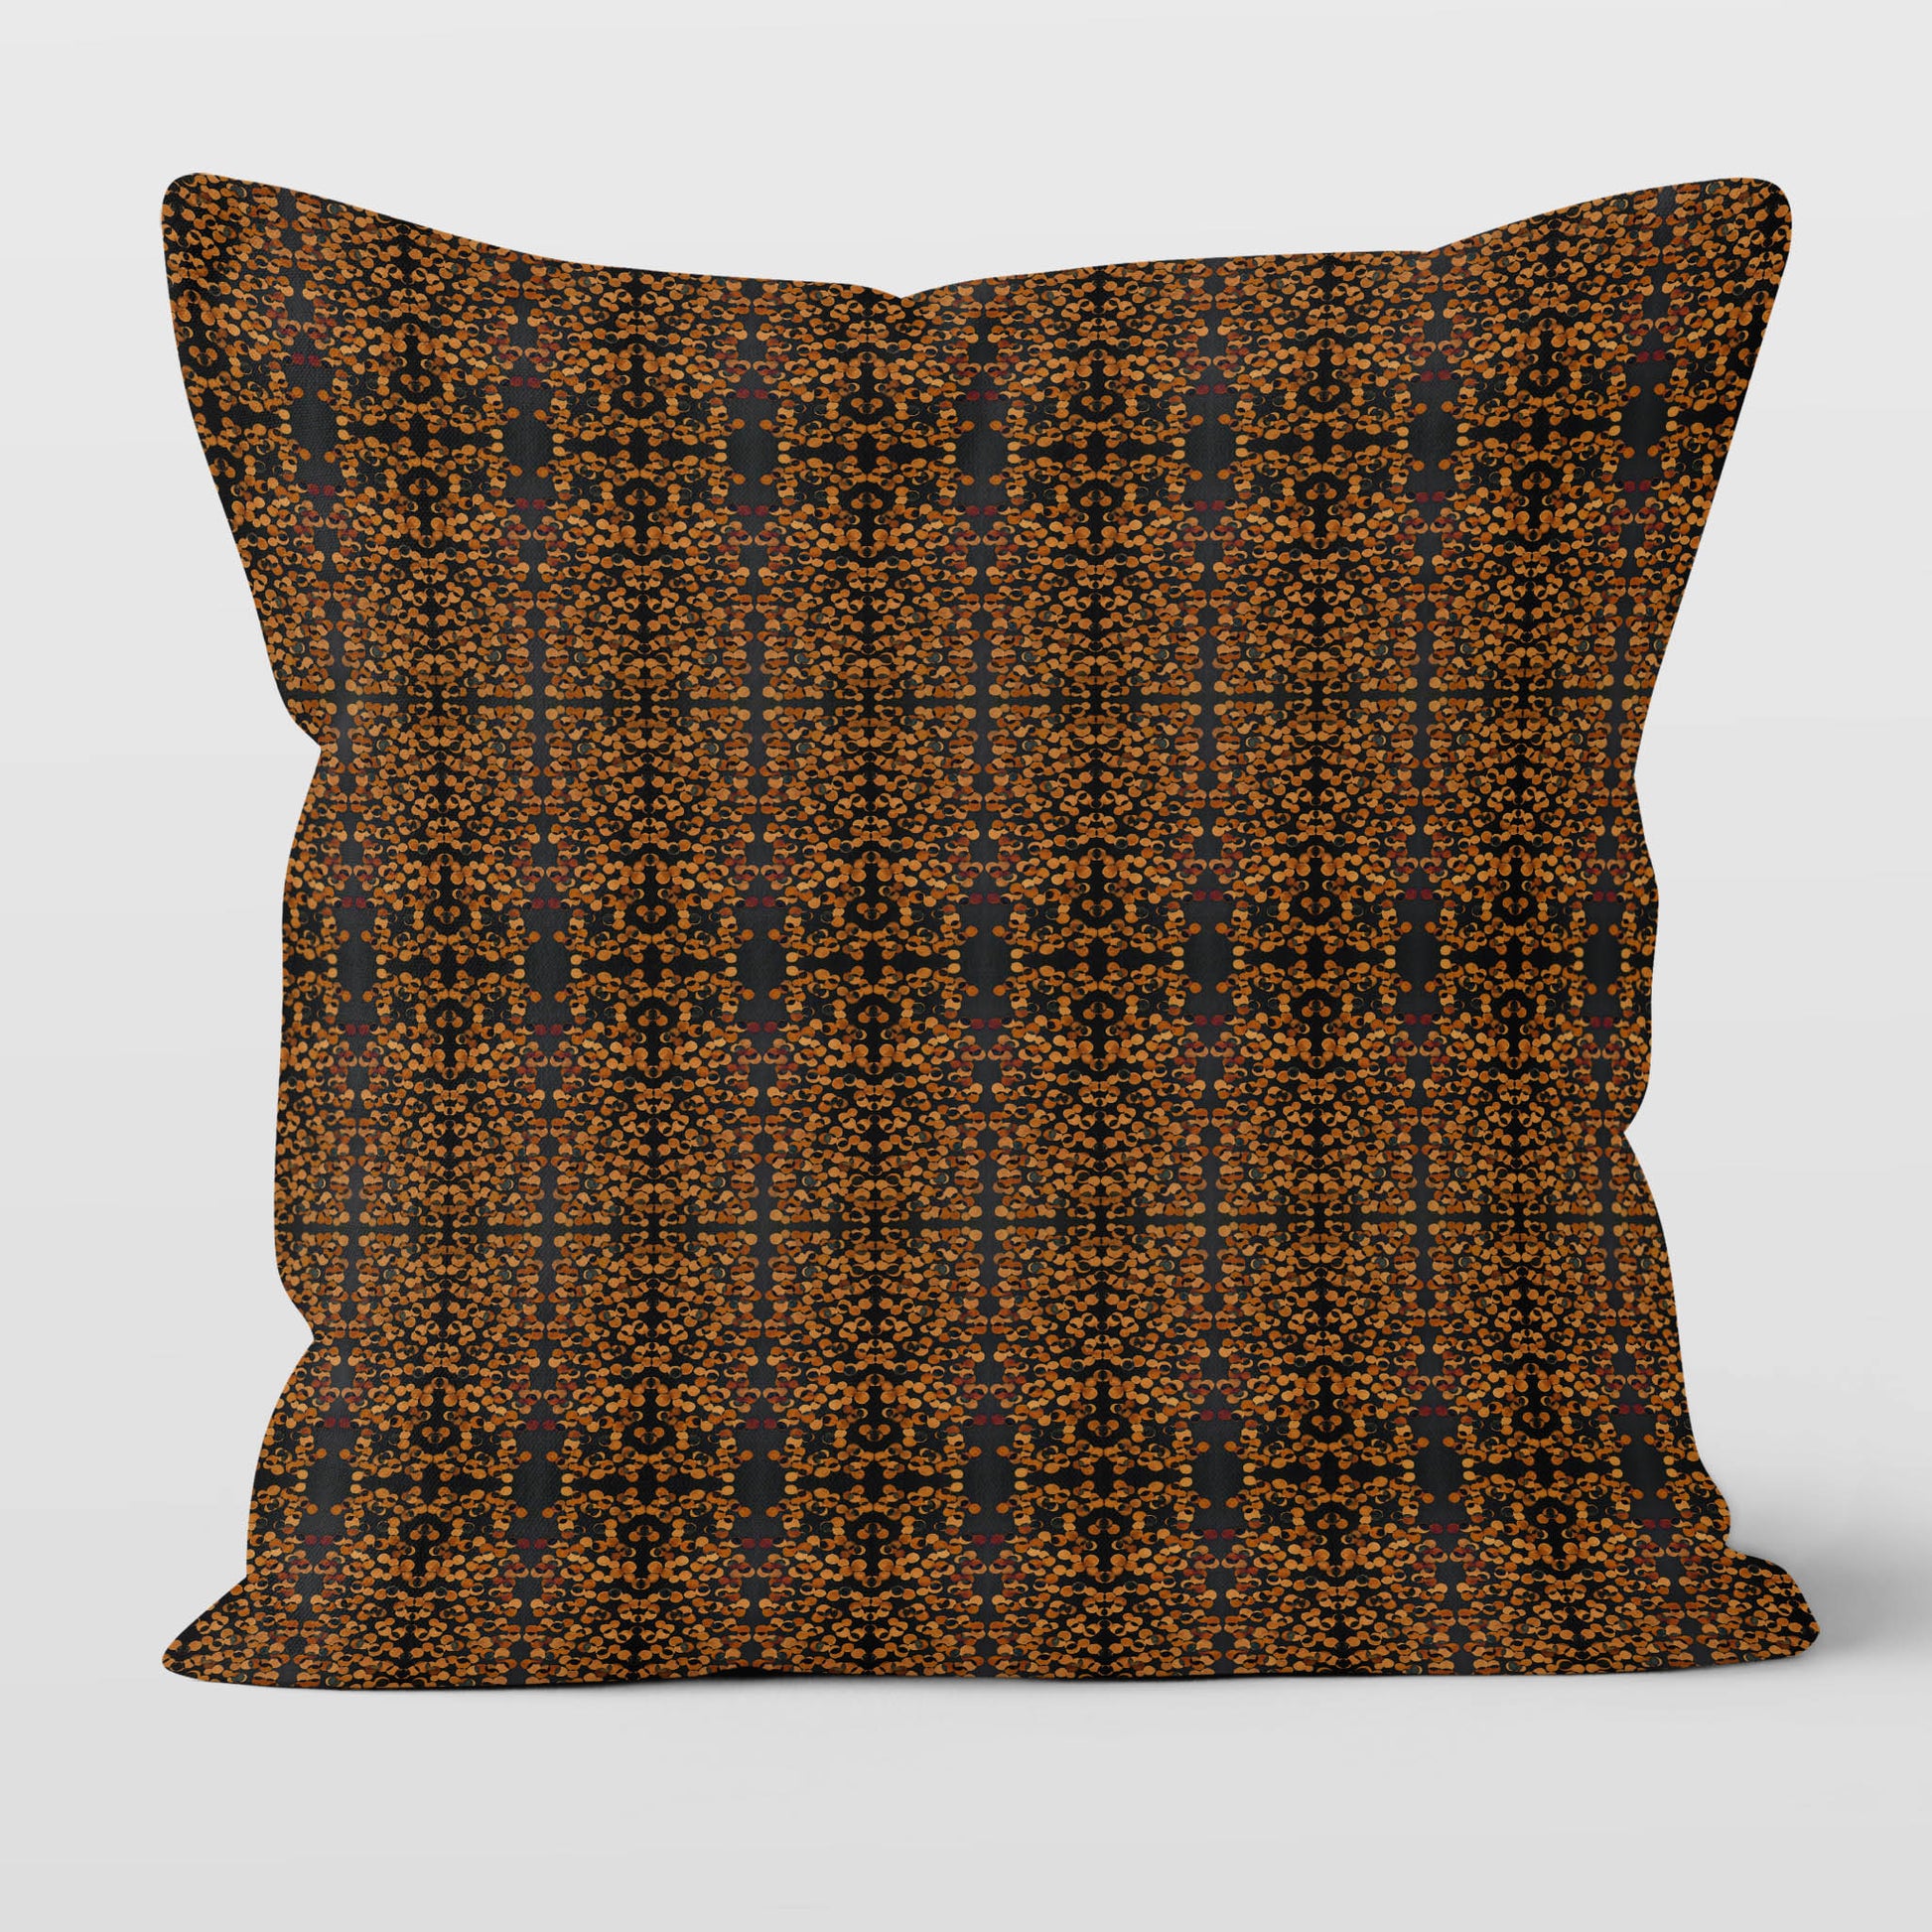 Square throw pillow featuring a hand-pattern in black and copper tones.